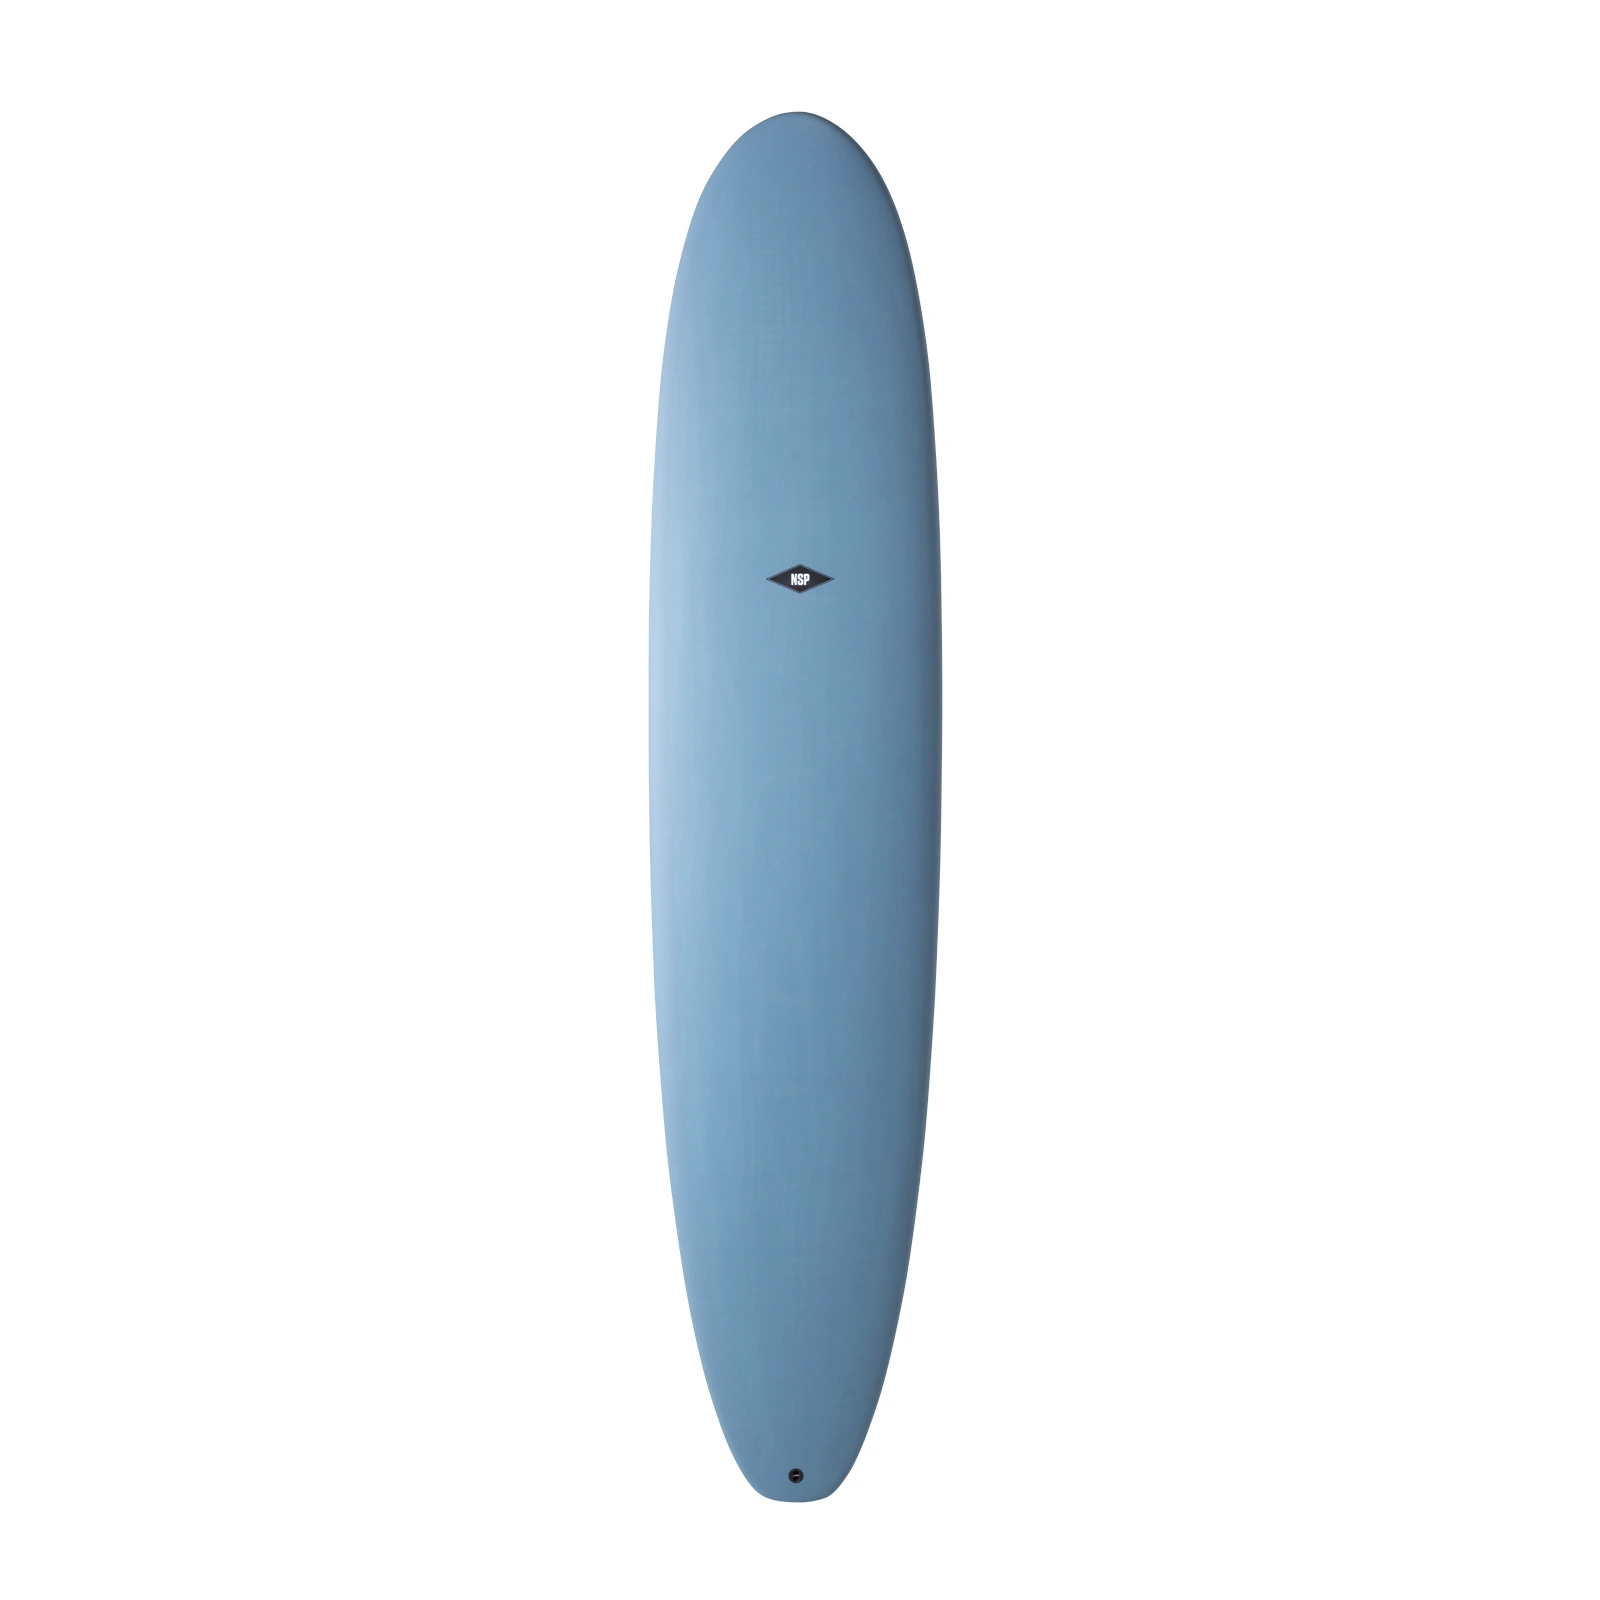 The NSP Longboard Protech • built & honed by NSP Surfboards